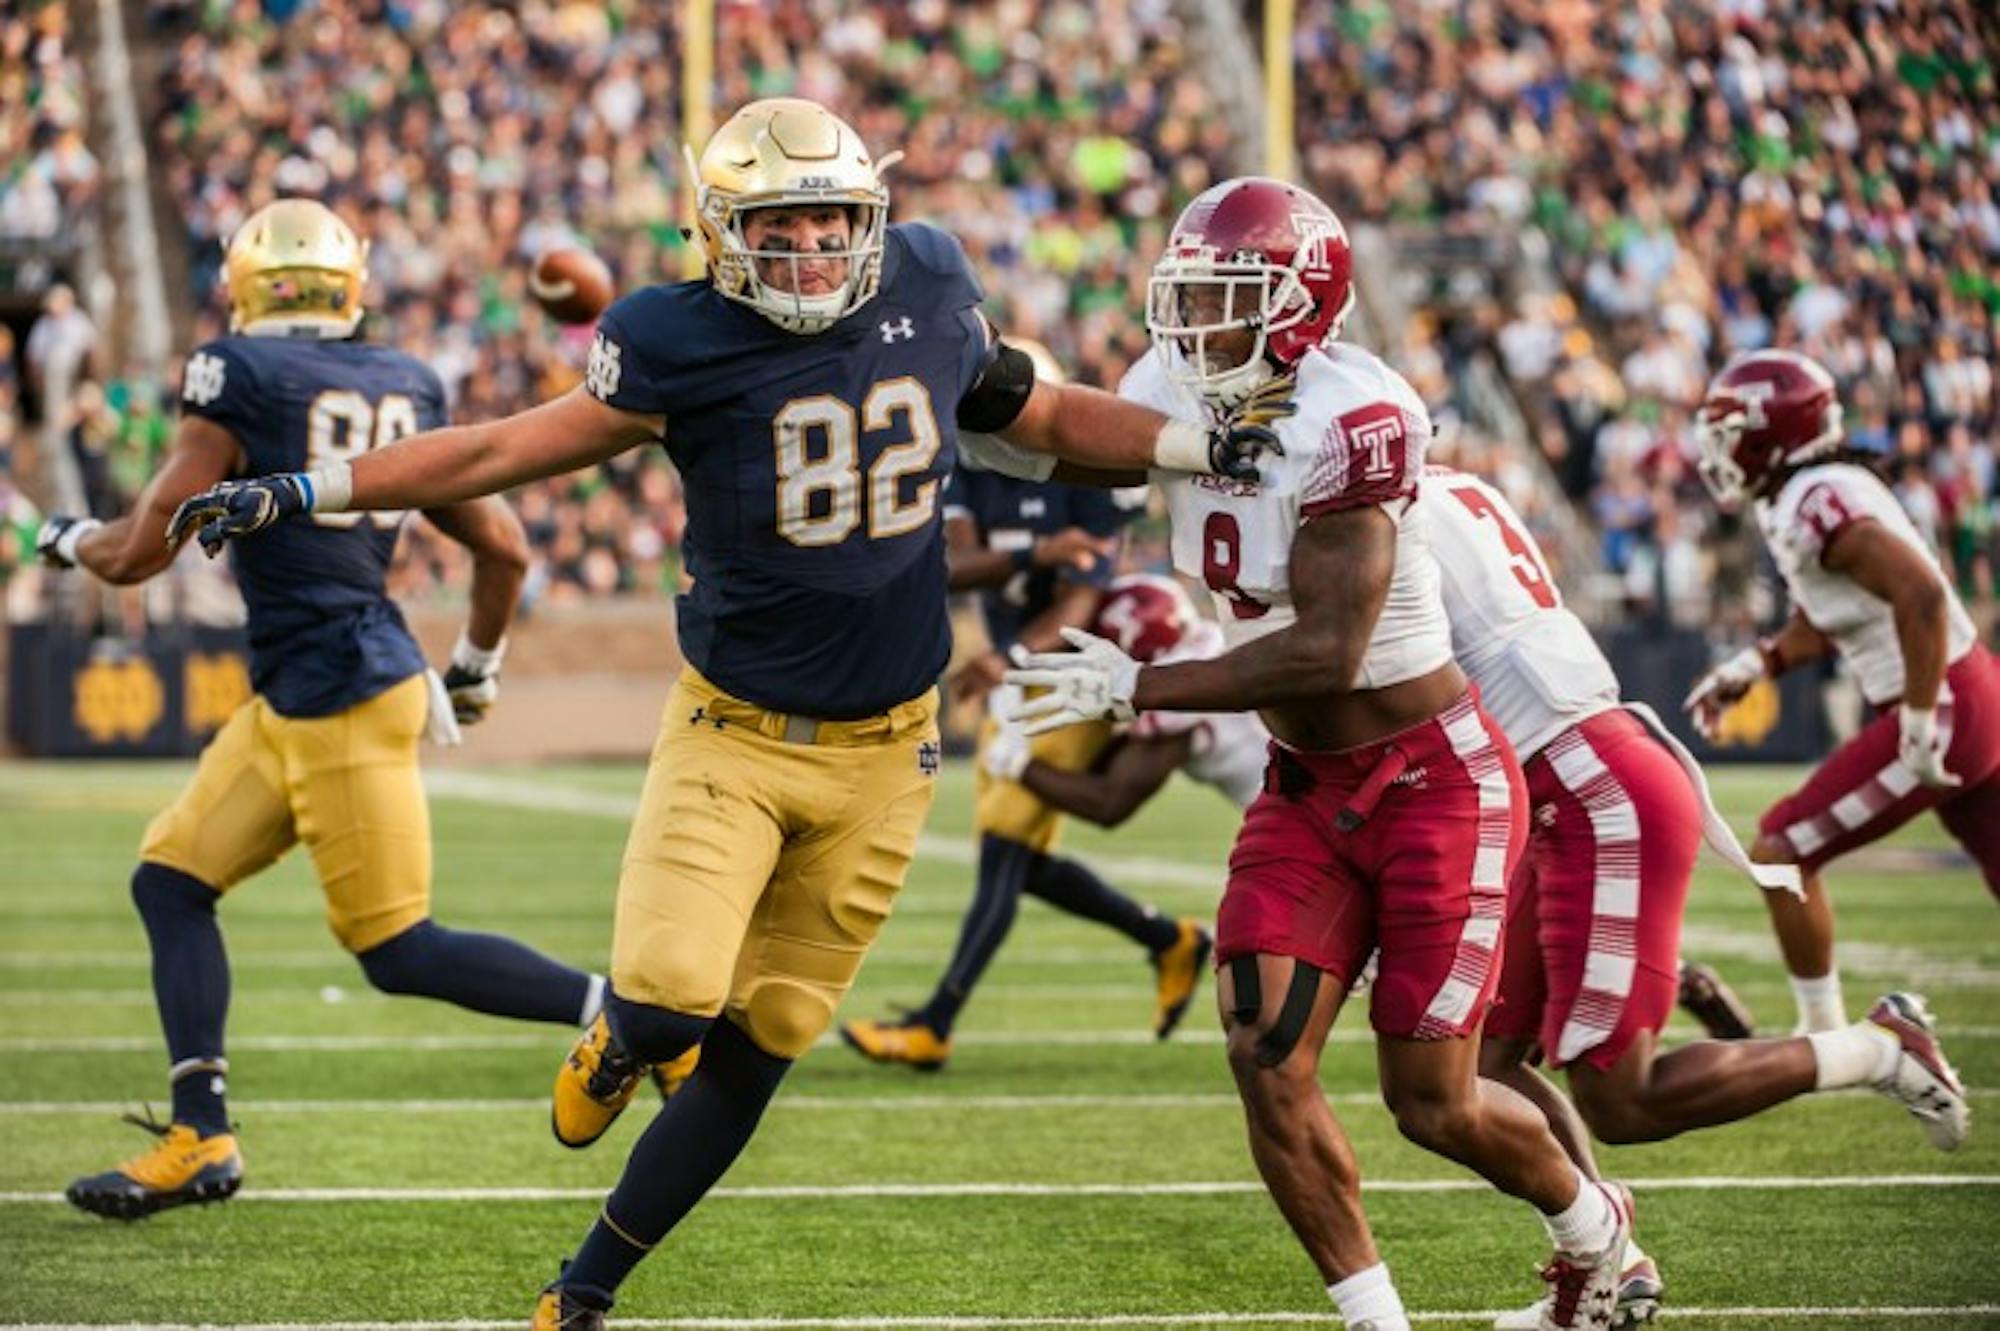 Irish senior tight end Nic Weishar looks to create separation as he runs a route during Notre Dame’s 49-16 win over Temple on Saturday at Notre Dame Stadium. Weishar caught his first career touchdown reception in the first quarter of the win for the Irish.